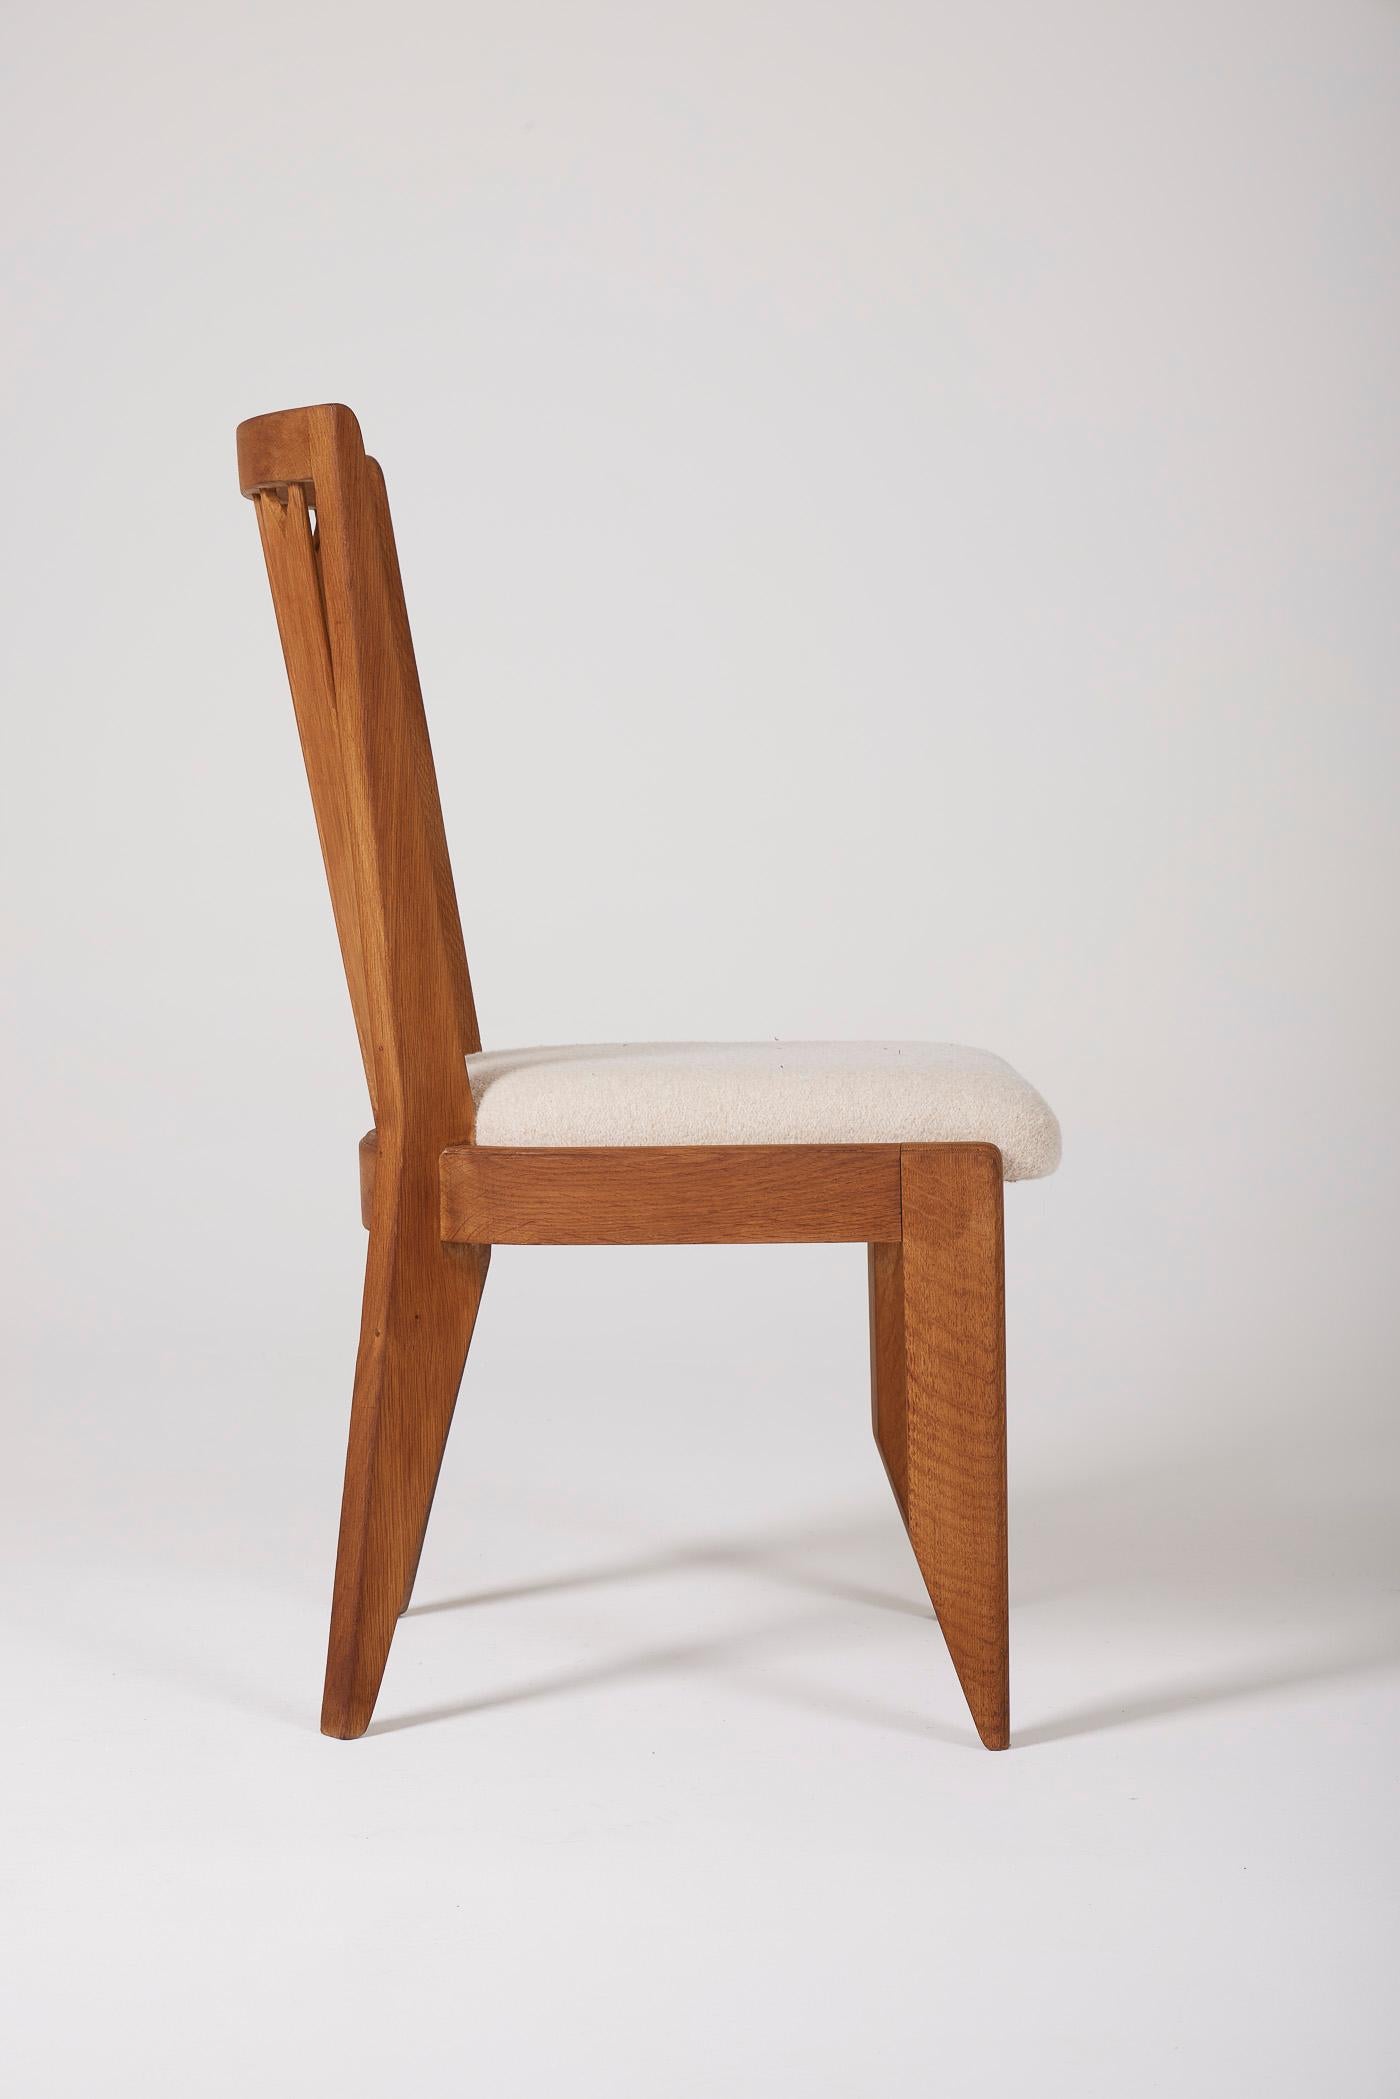 Wood Guillerme & Chambron chair